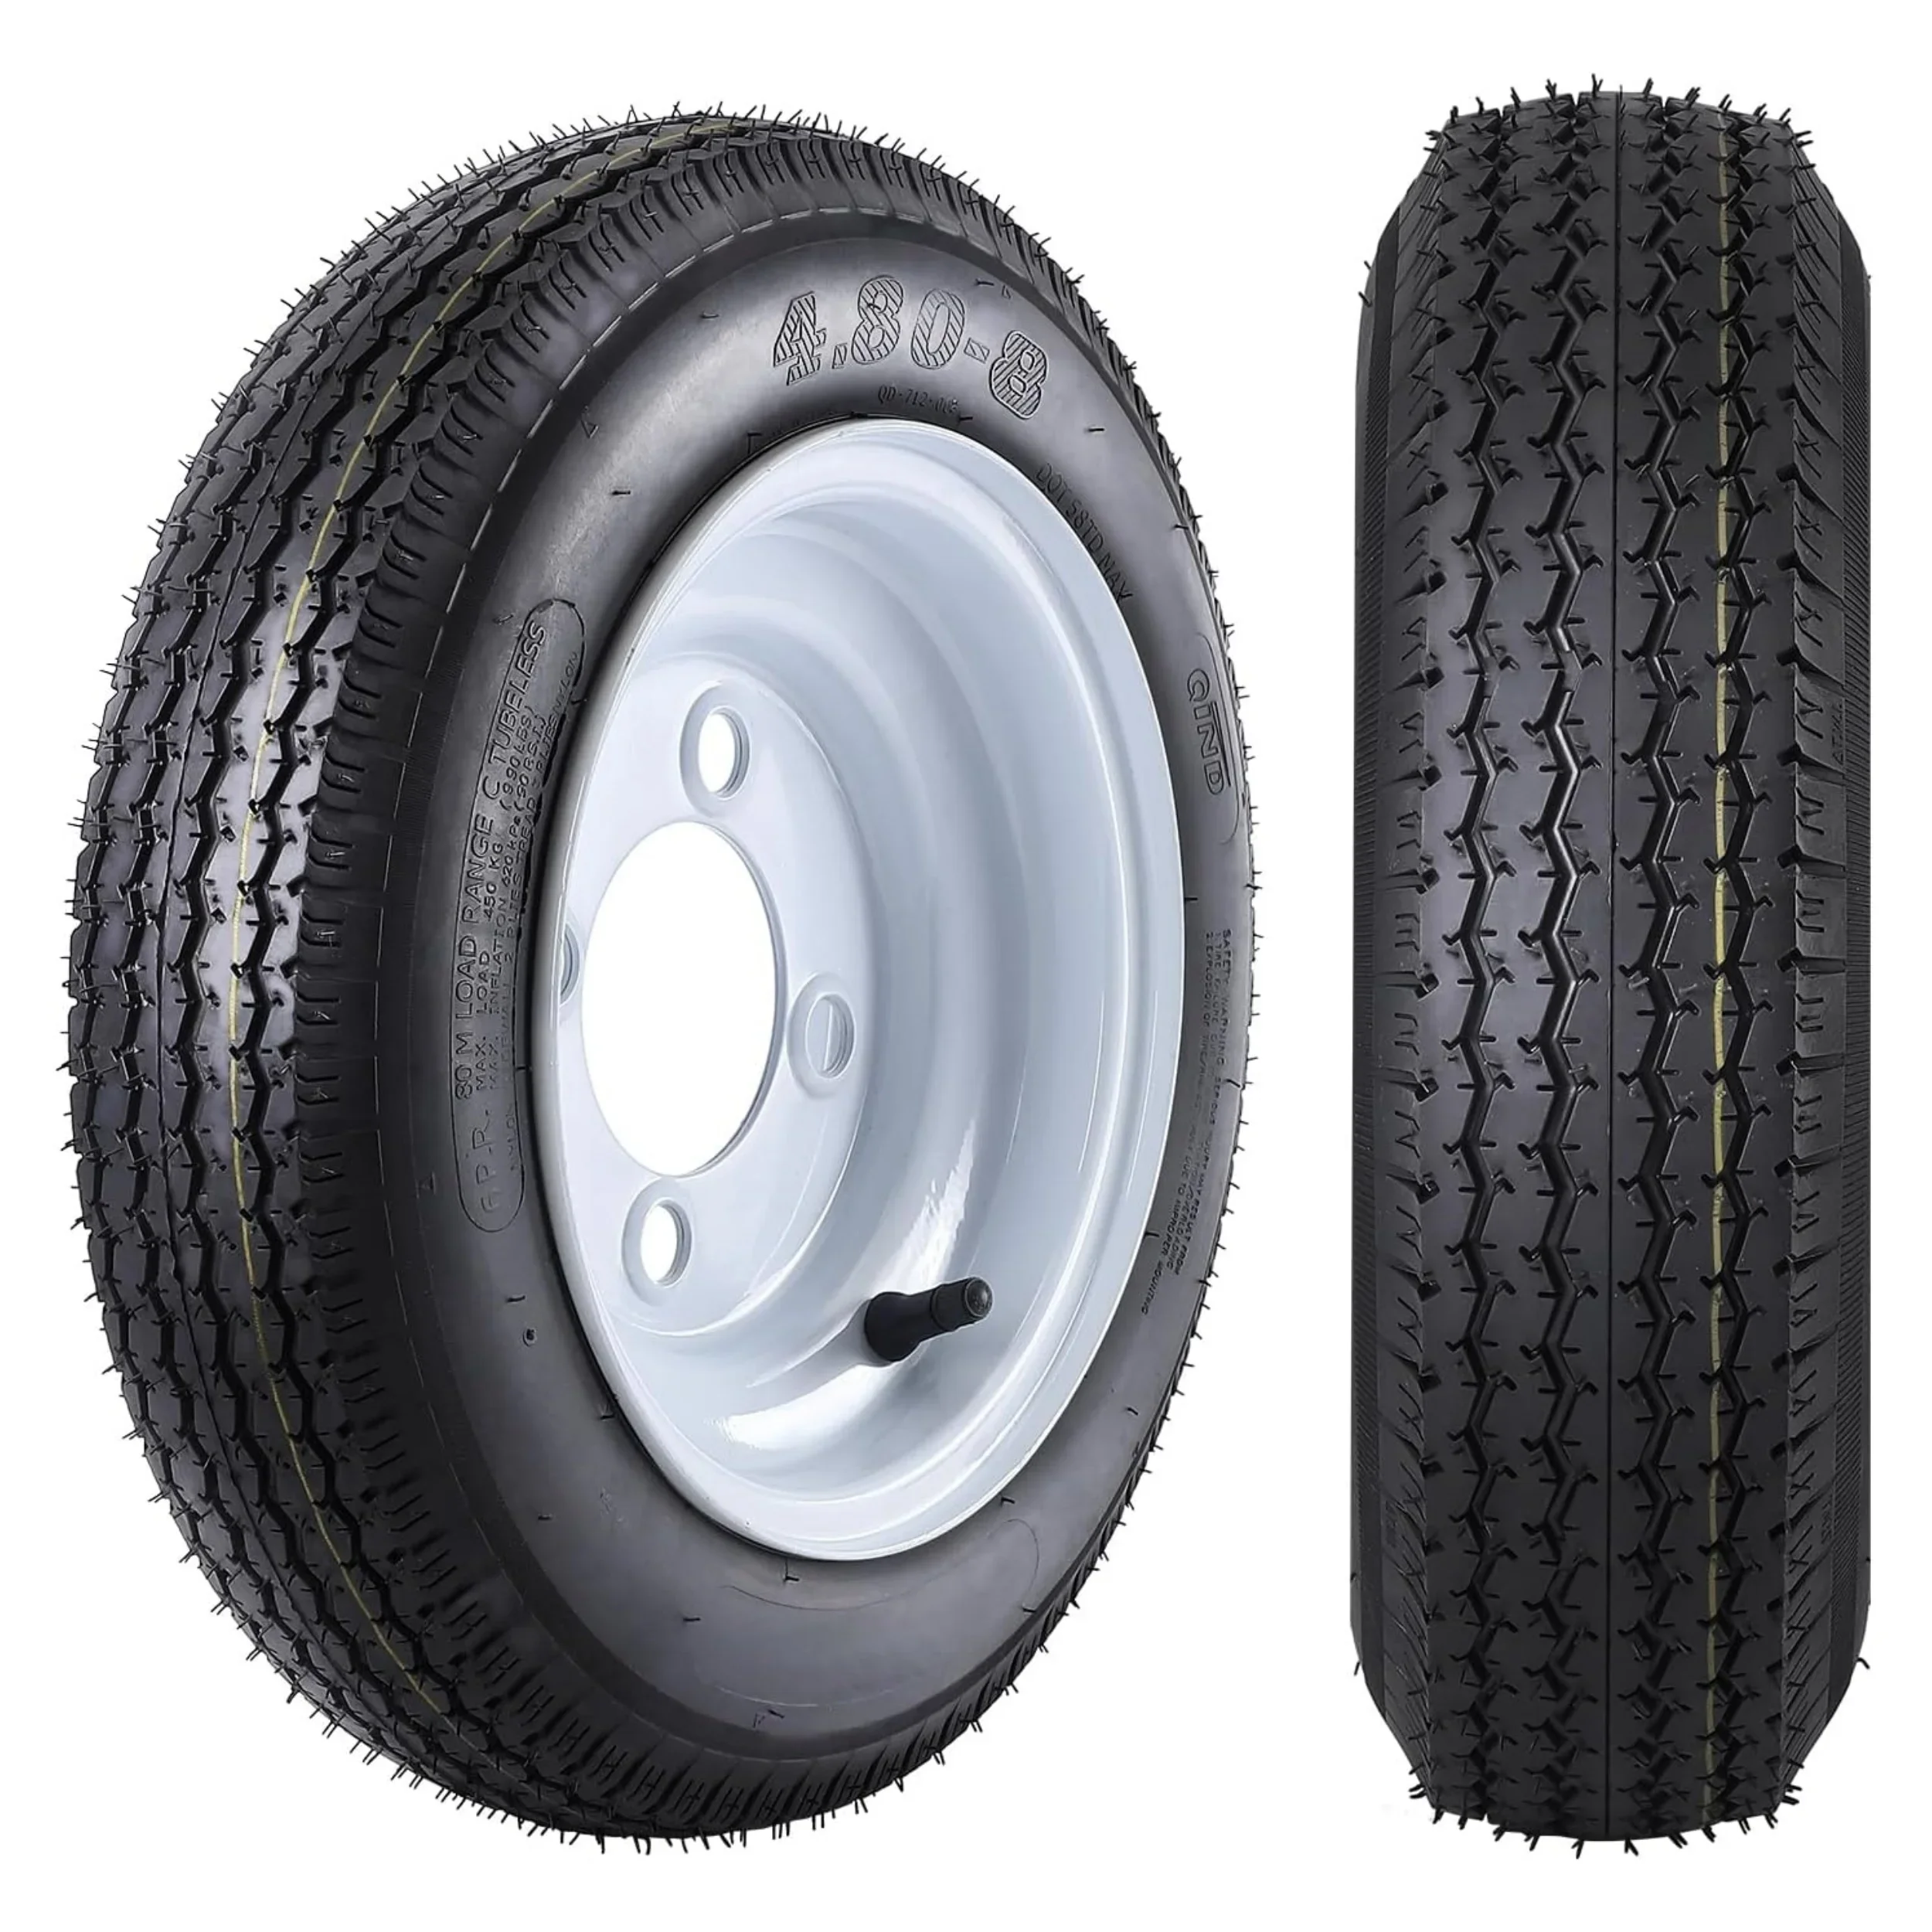 

High Quality 4.80-8 6PR Load Range C Trailer Tires with 8'' Rims - 2 Pack, 4 Lug on 4'' for Smooth Towing Experience - Durable 4